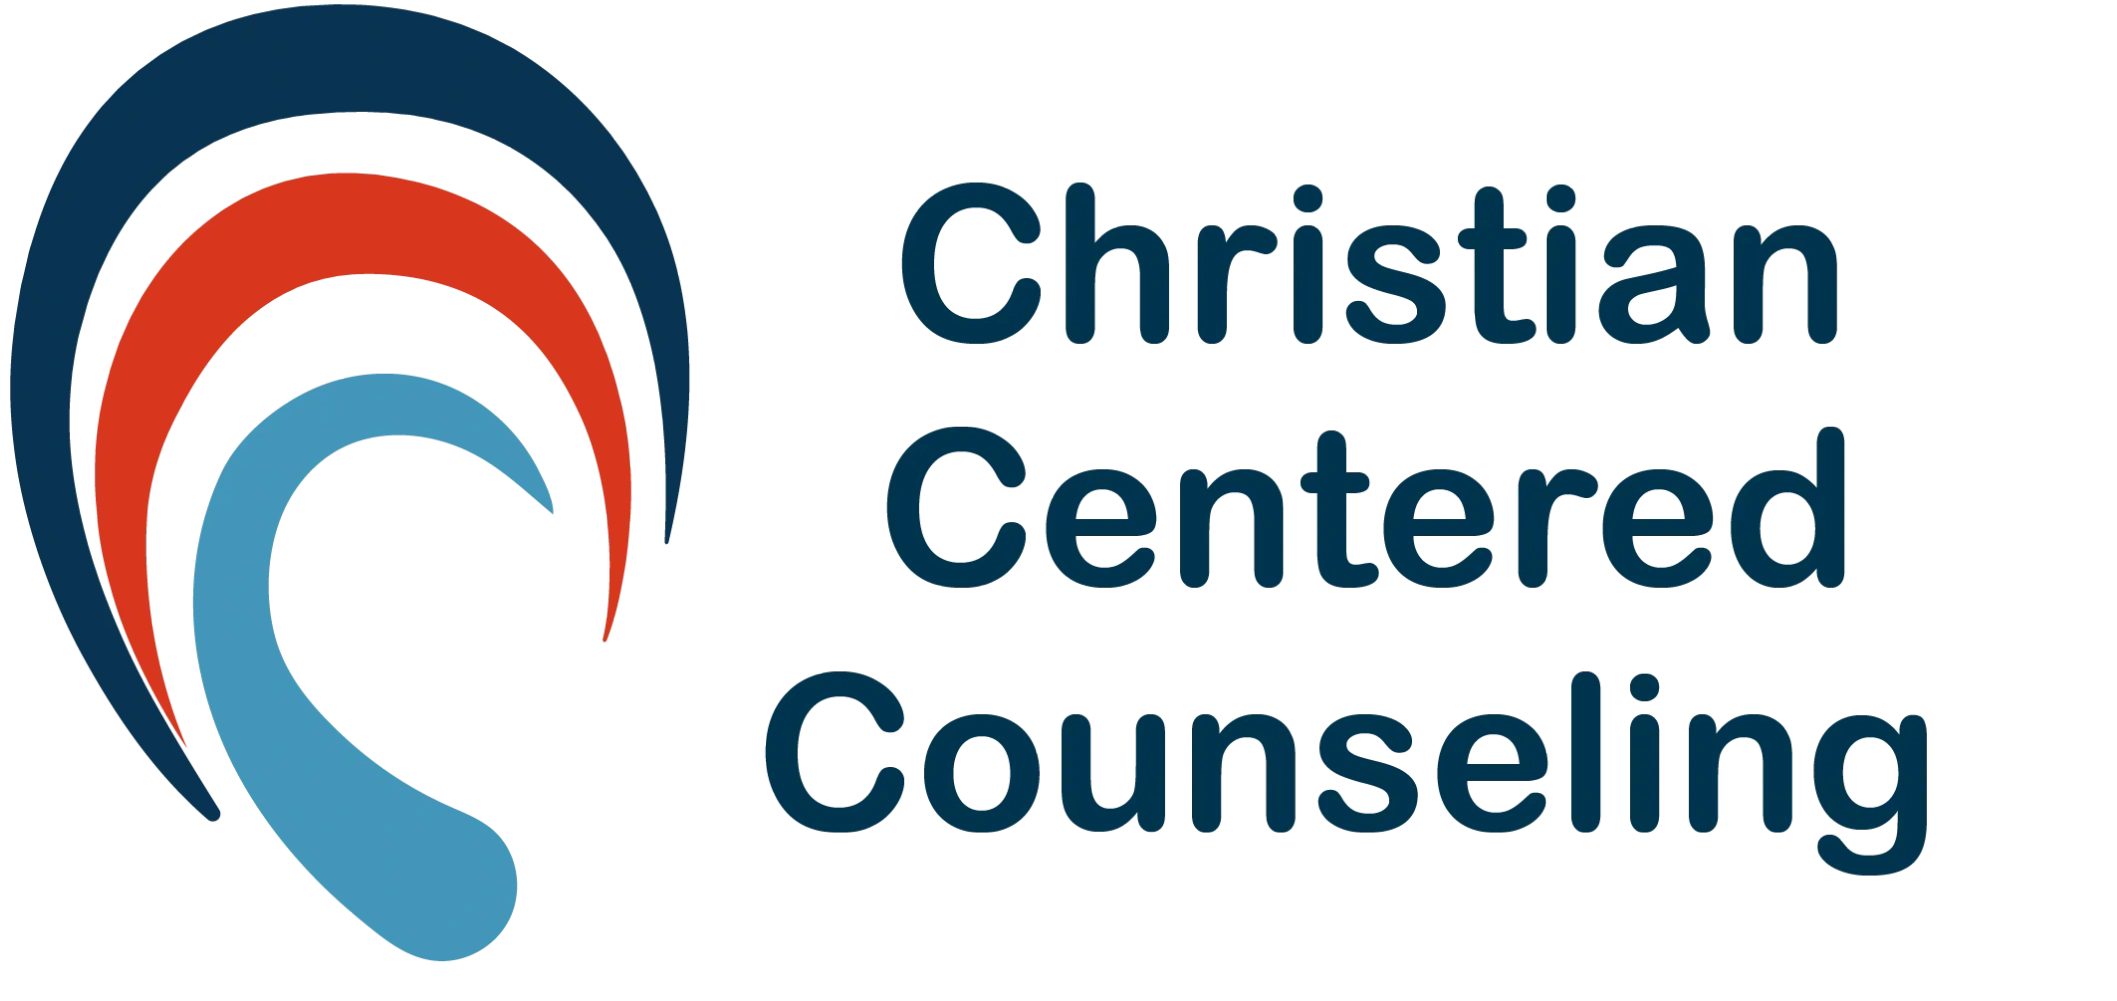 Christian Centered Counseling